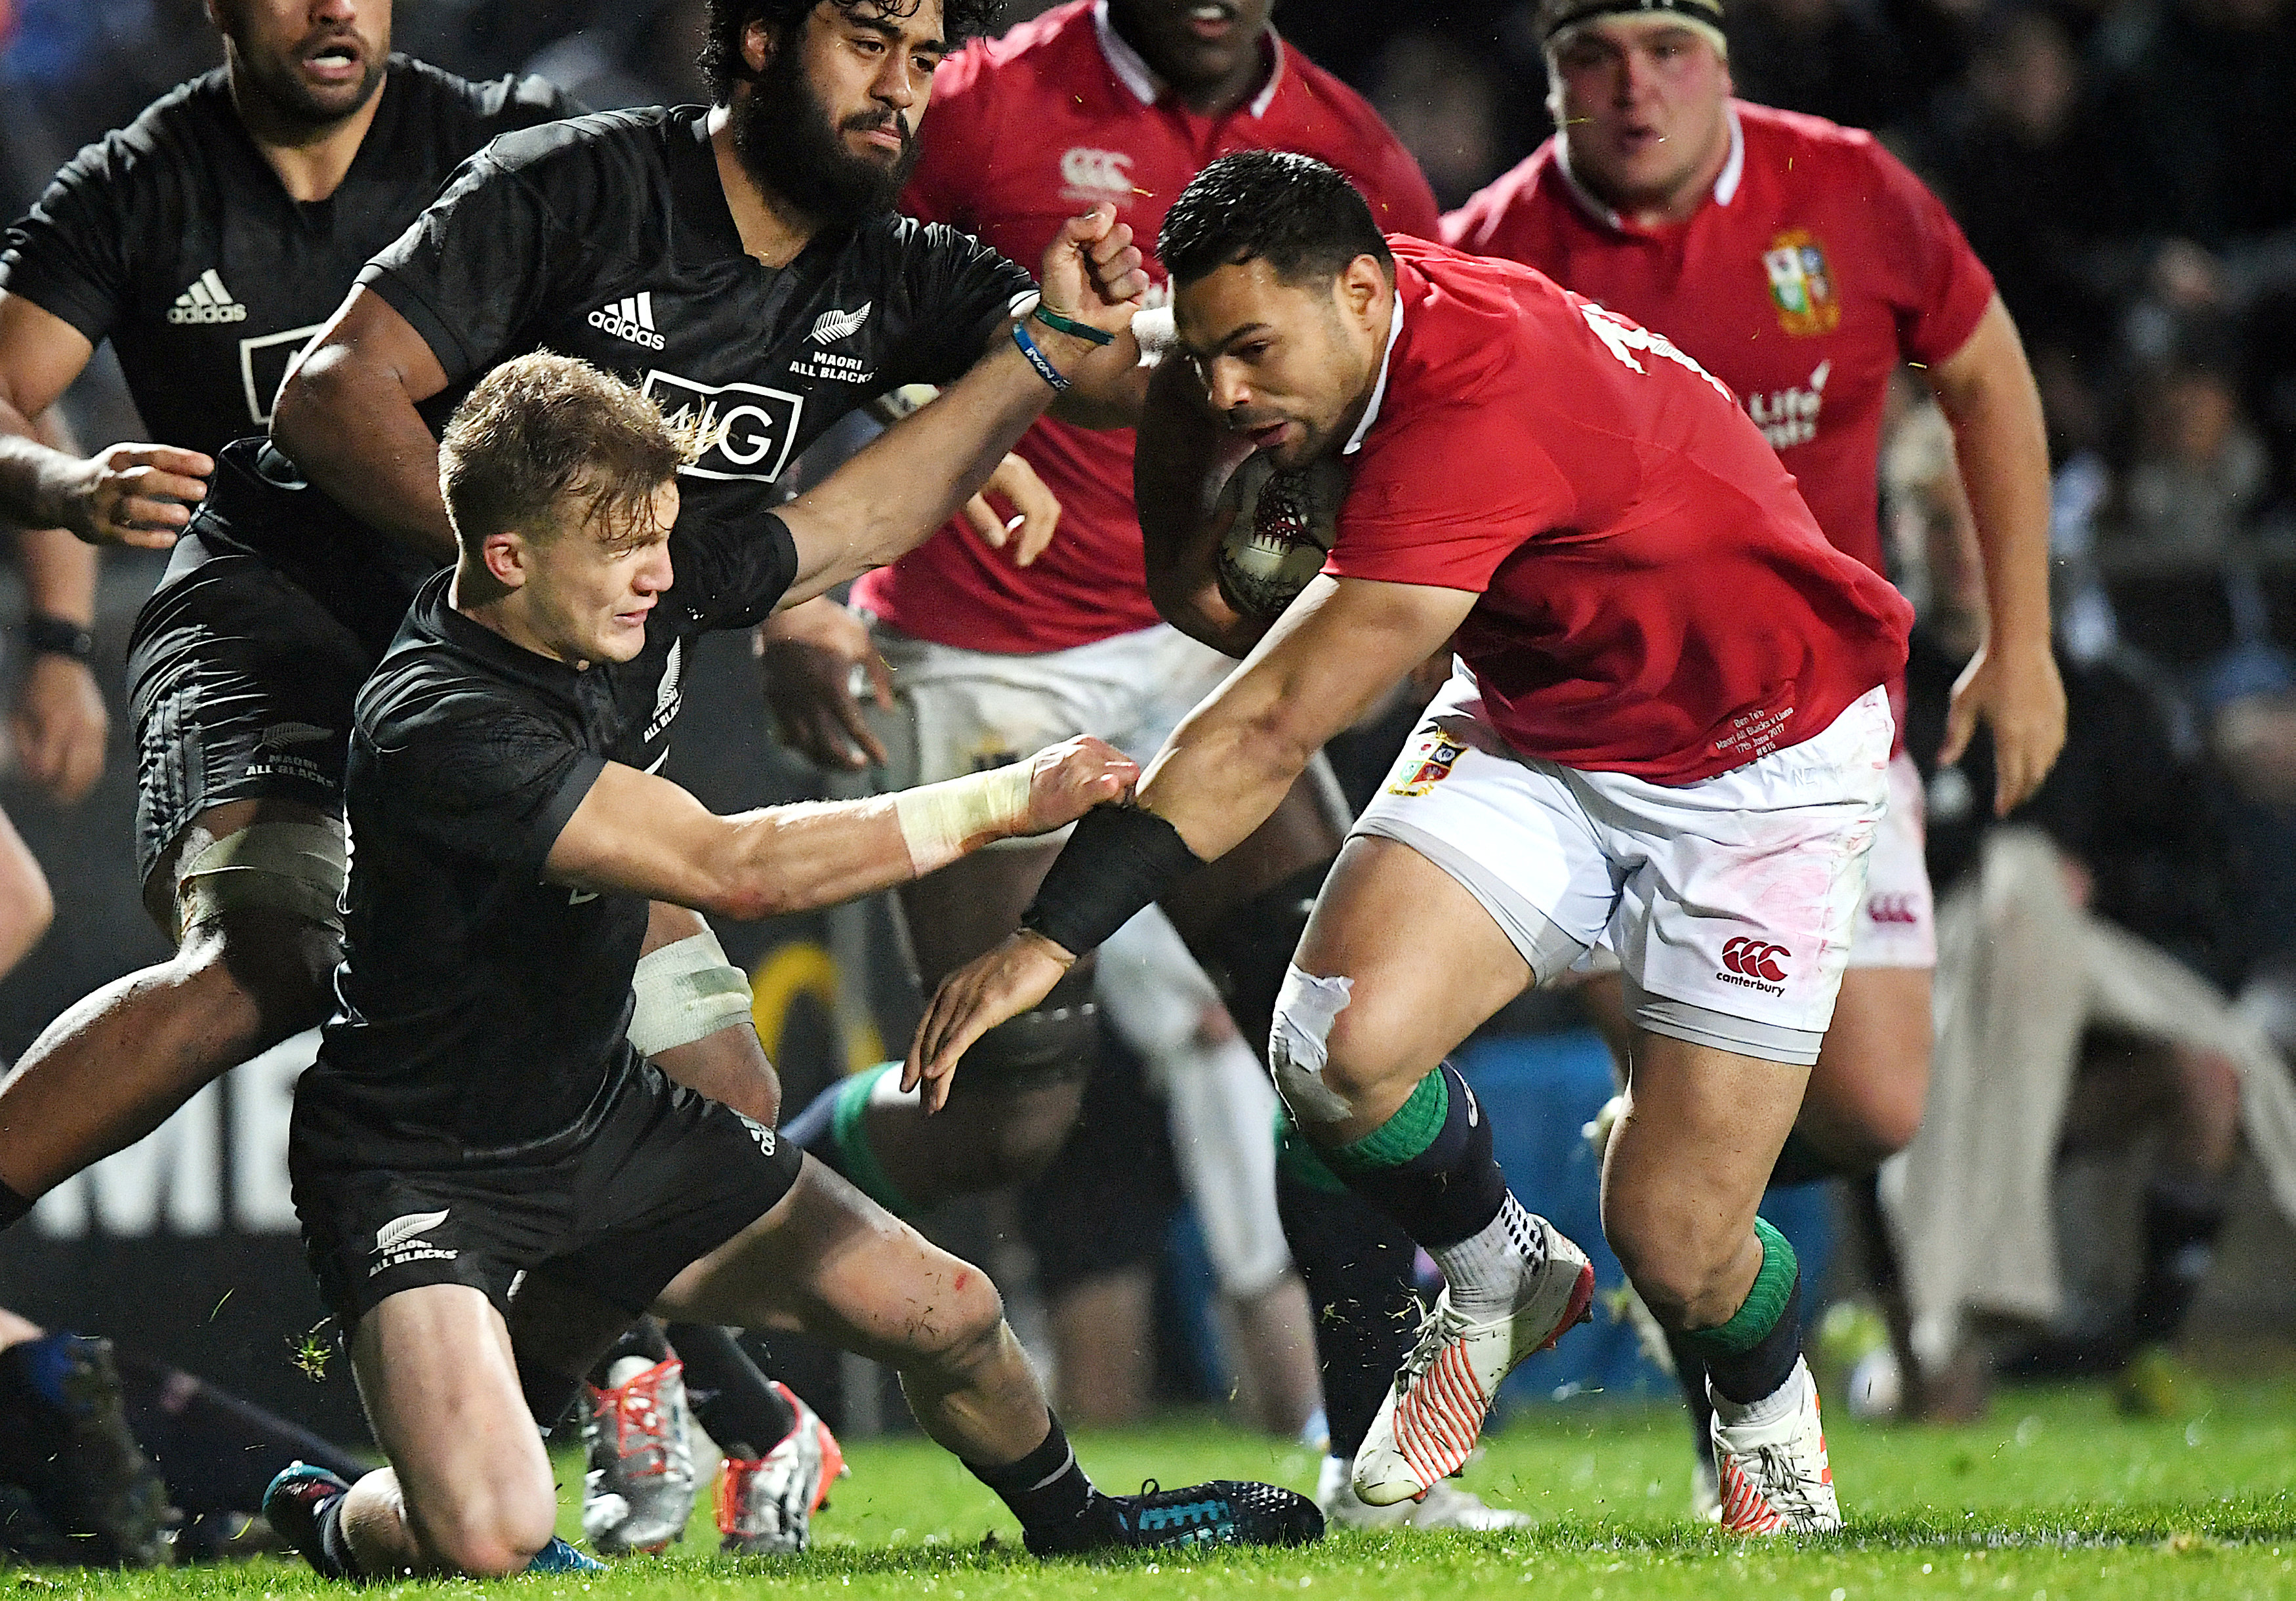 Rugby: Clinical Lions grind Maori All Blacks down in 32-10 win